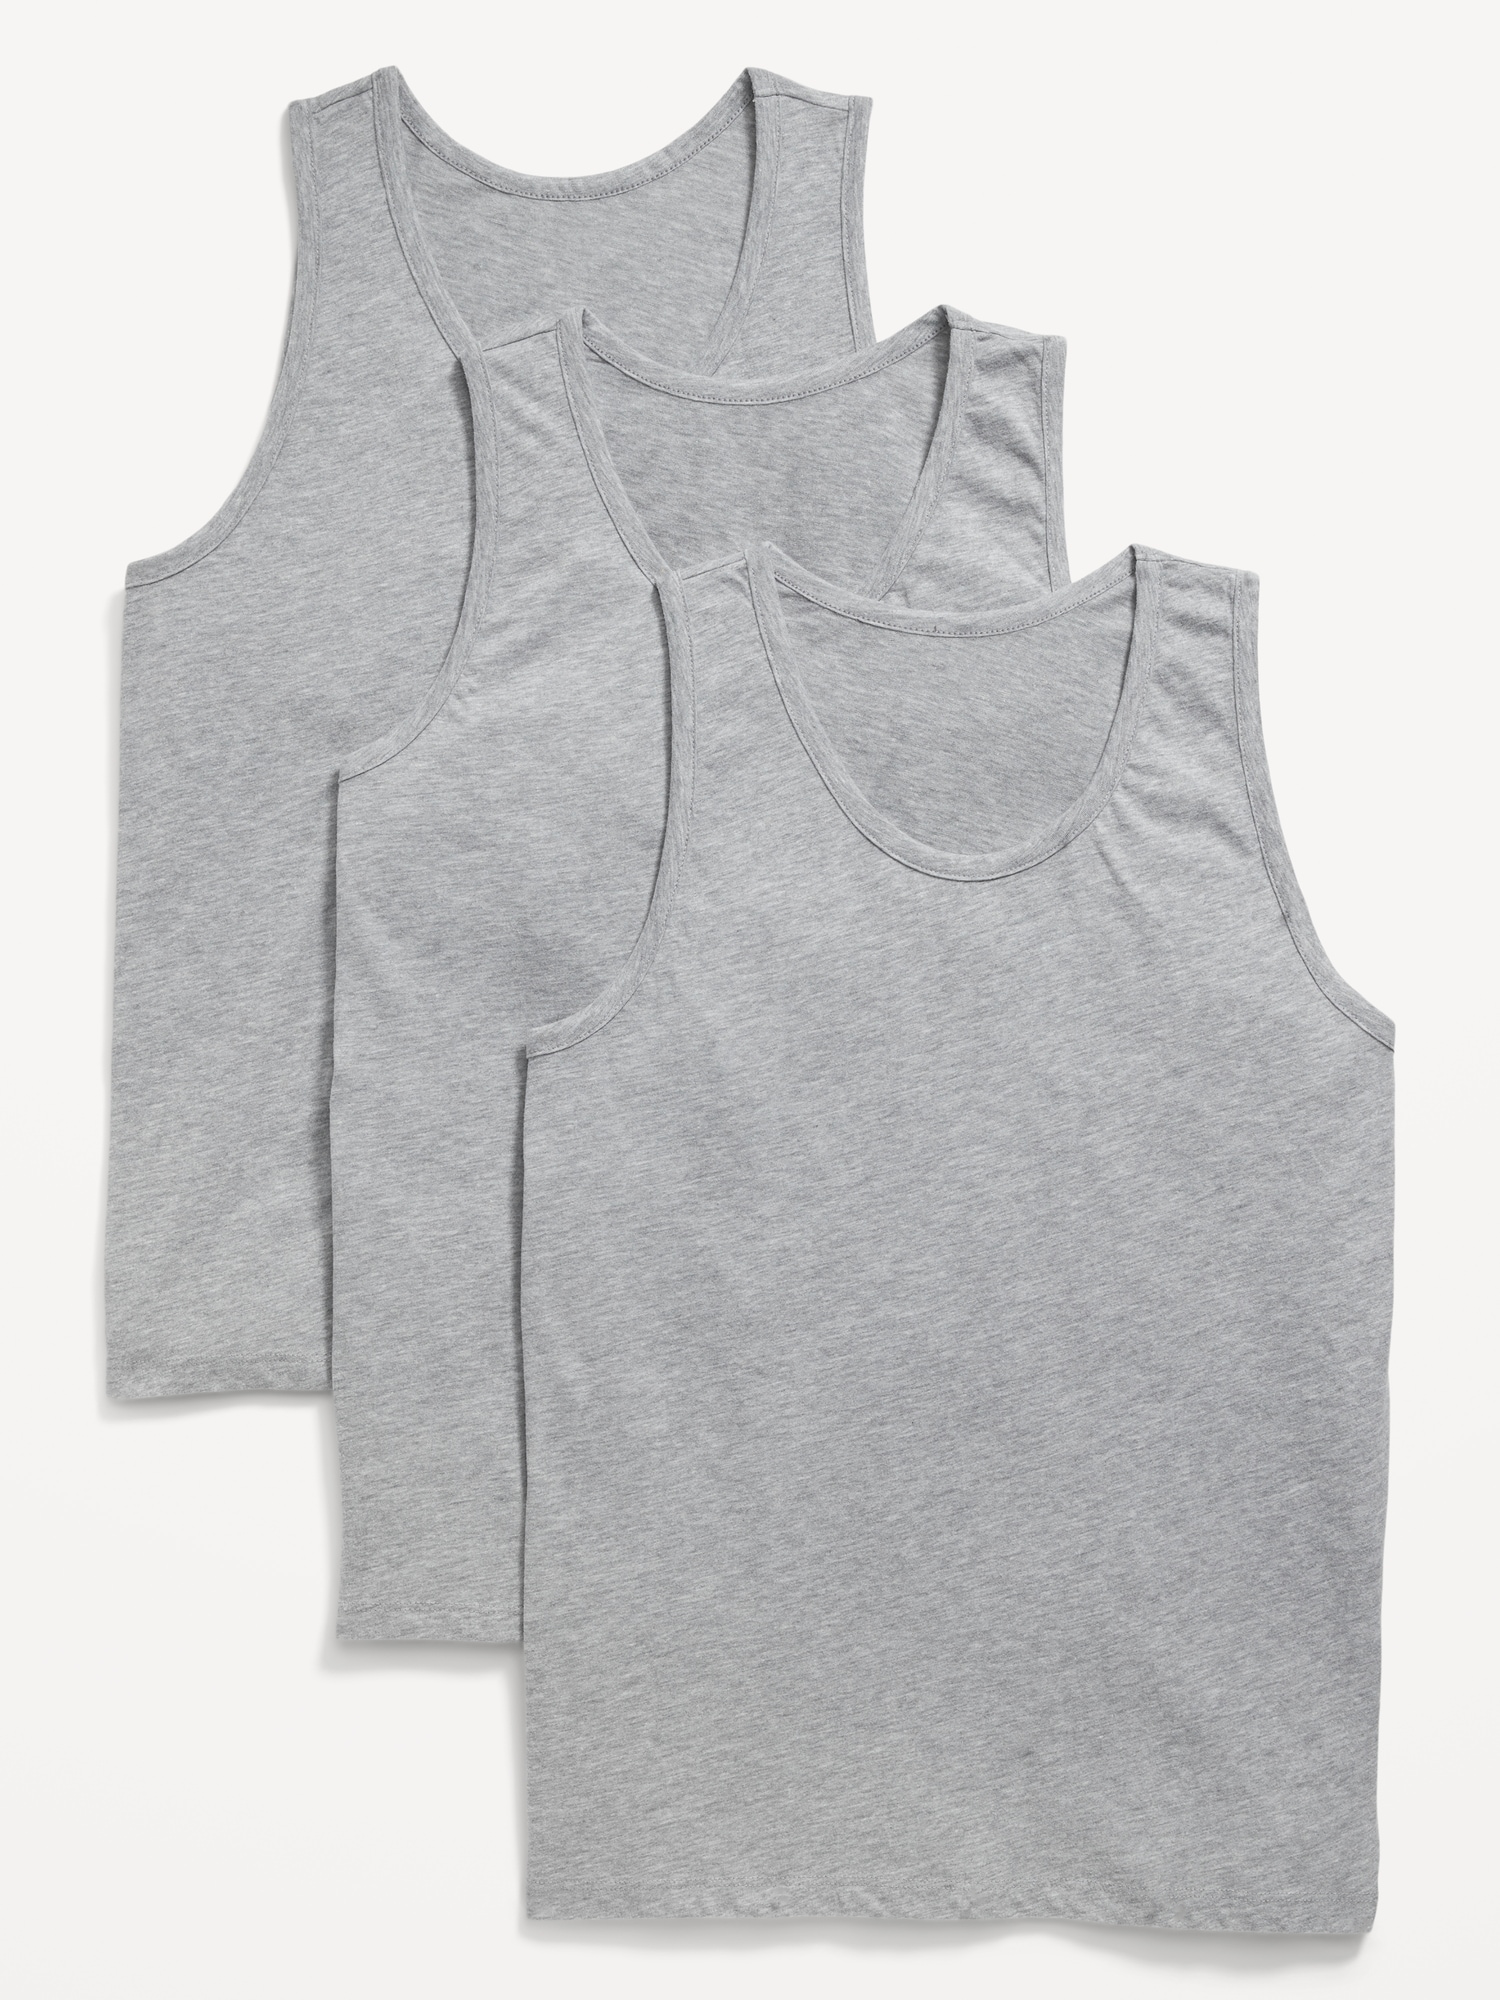 SKINY tank top 3 pack in trio selection